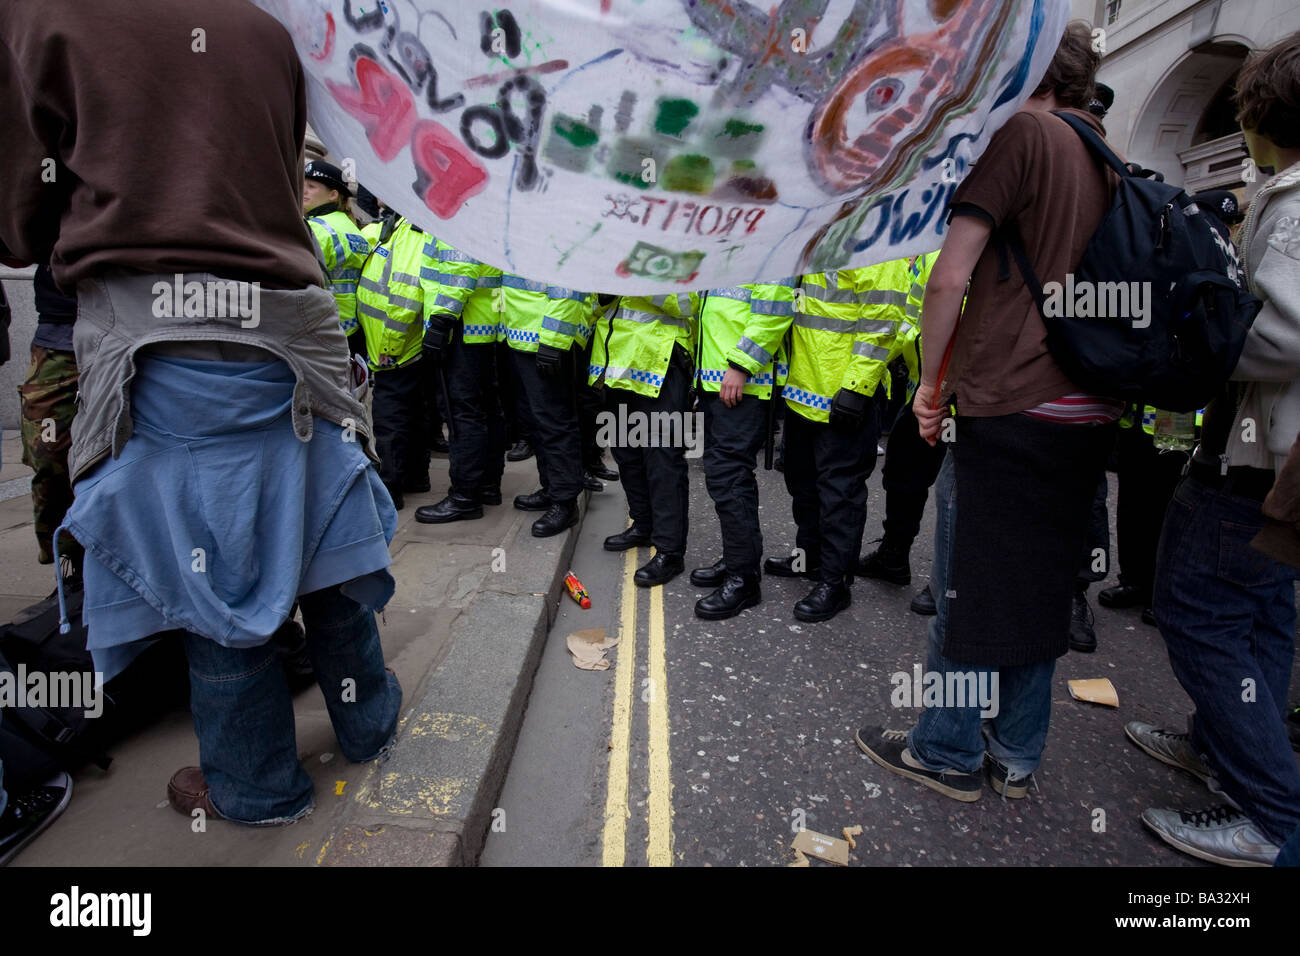 Police in kettle formation surrownd demonstrators at G20 protest Bank of England London Stock Photo